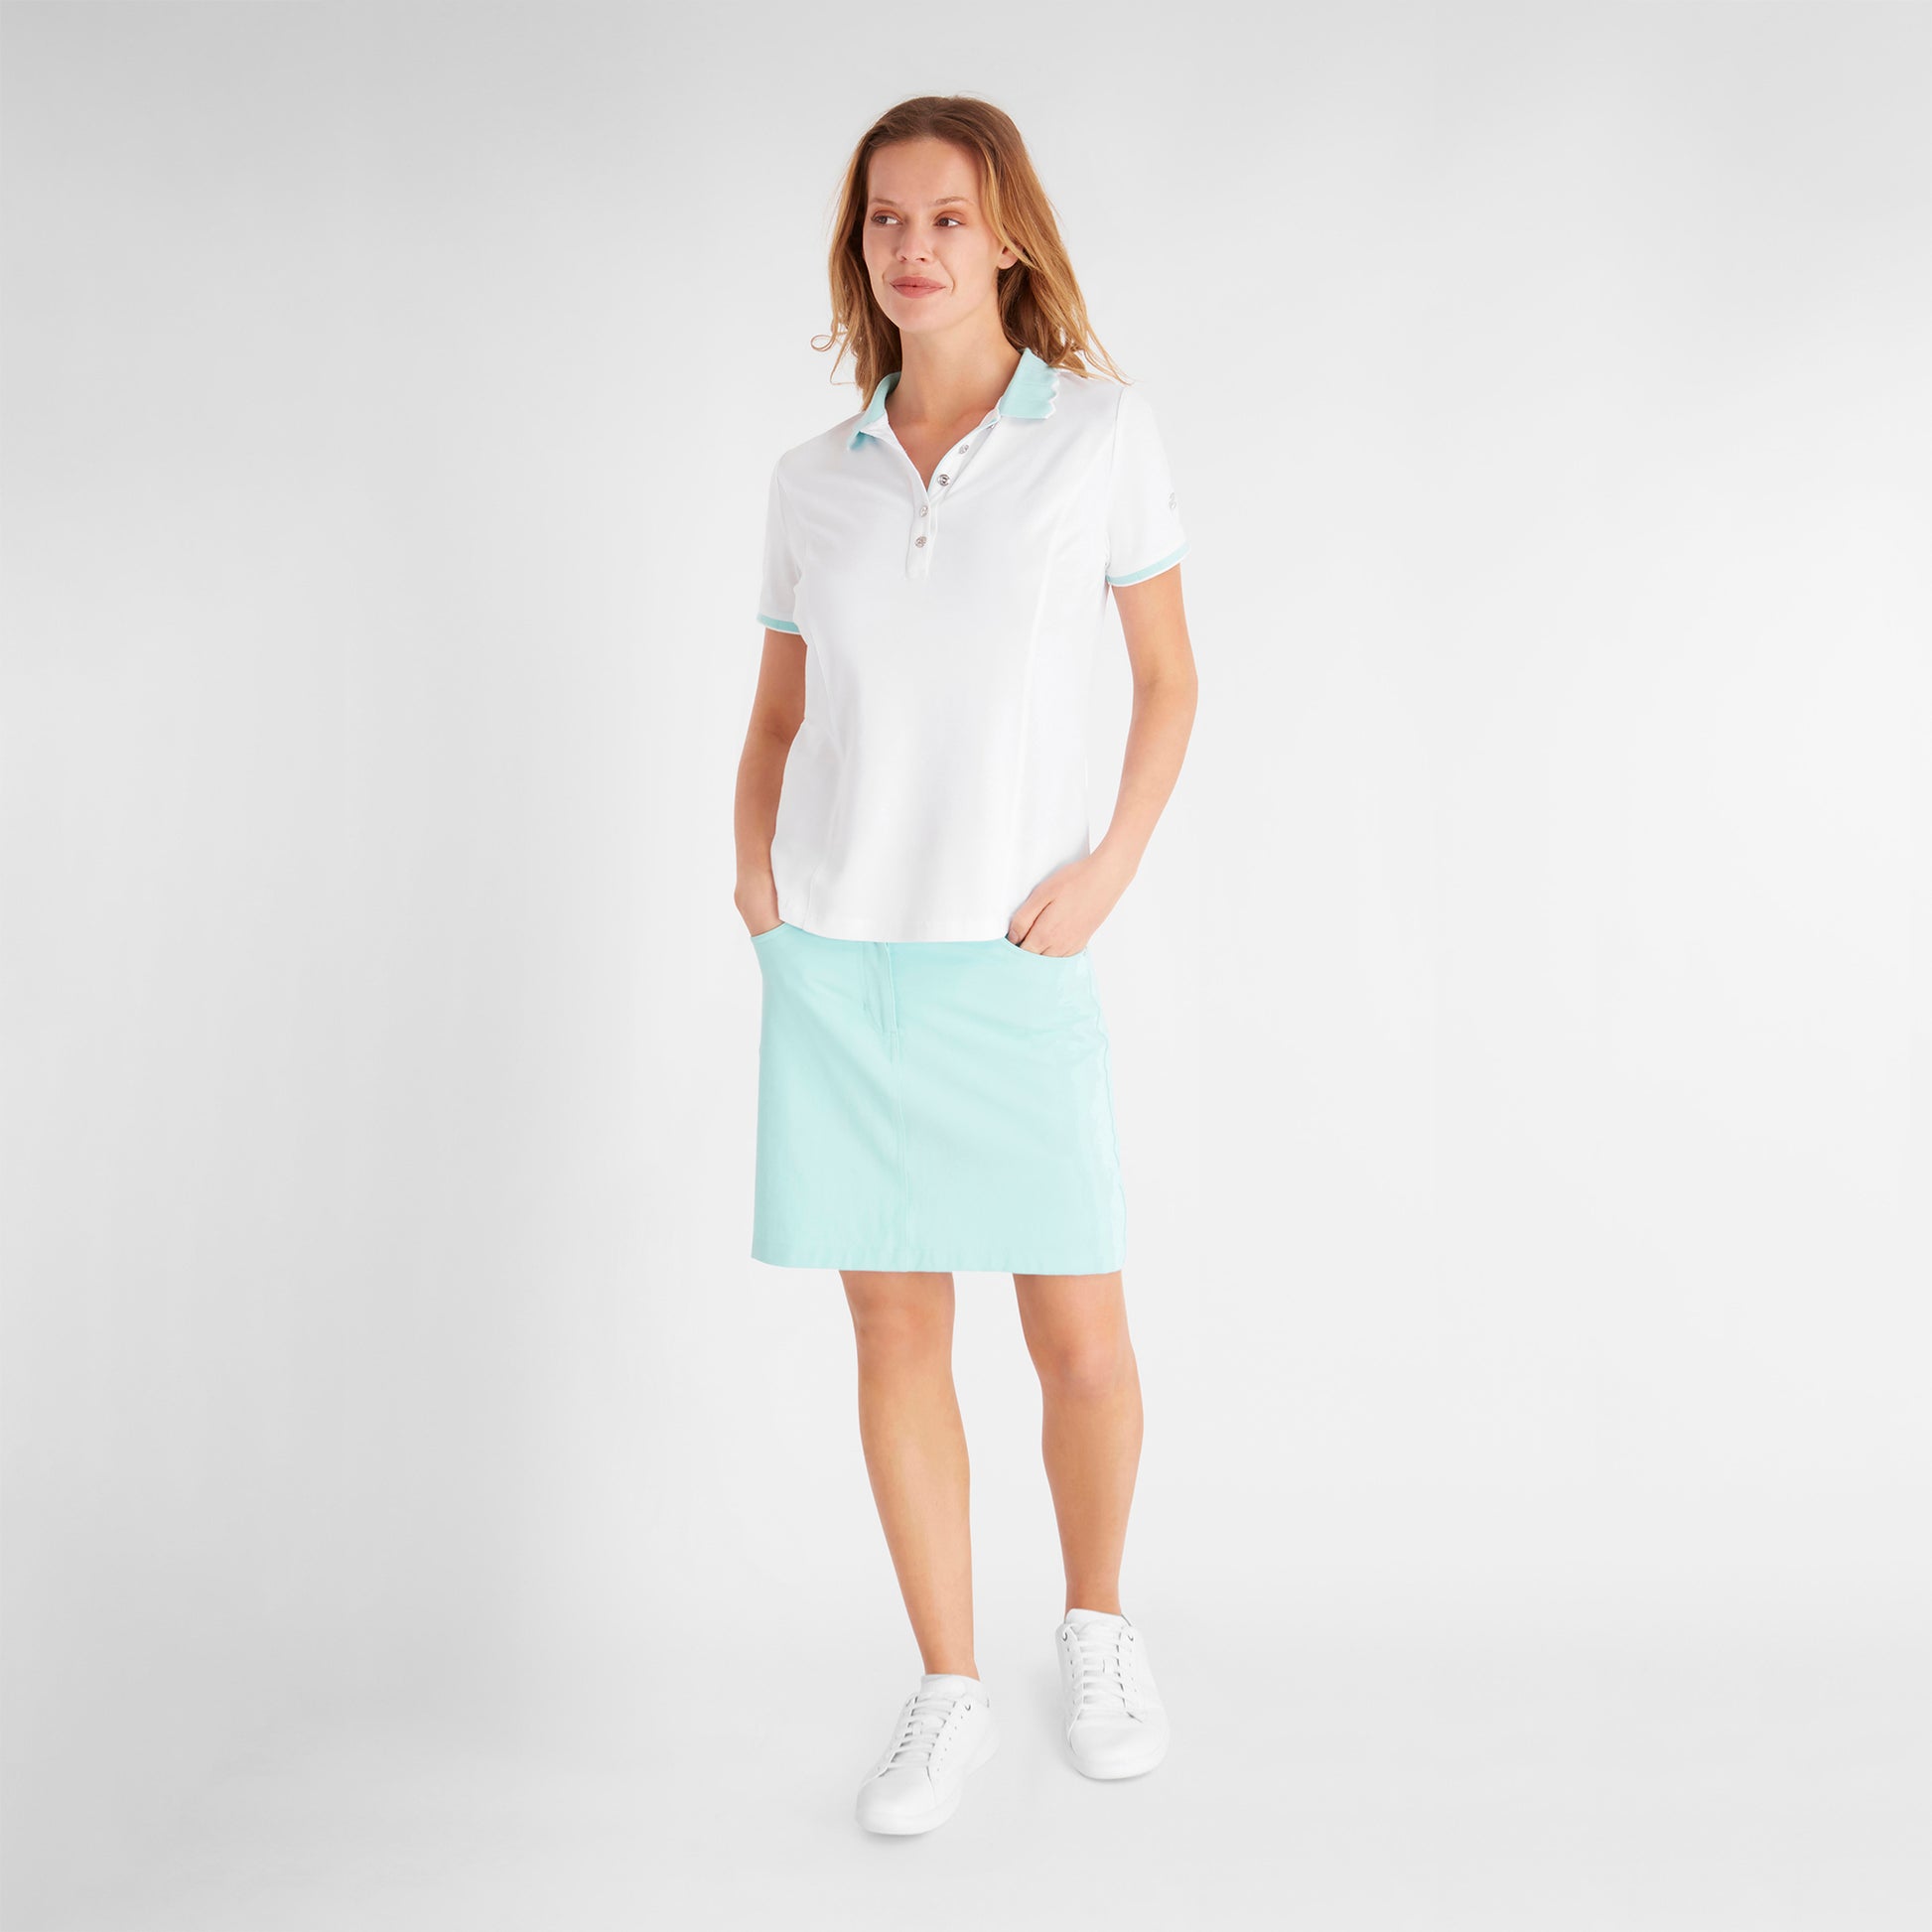 Green Lamb Ladies Short Sleeve Polo with Scalloped Collar in White & Aqua